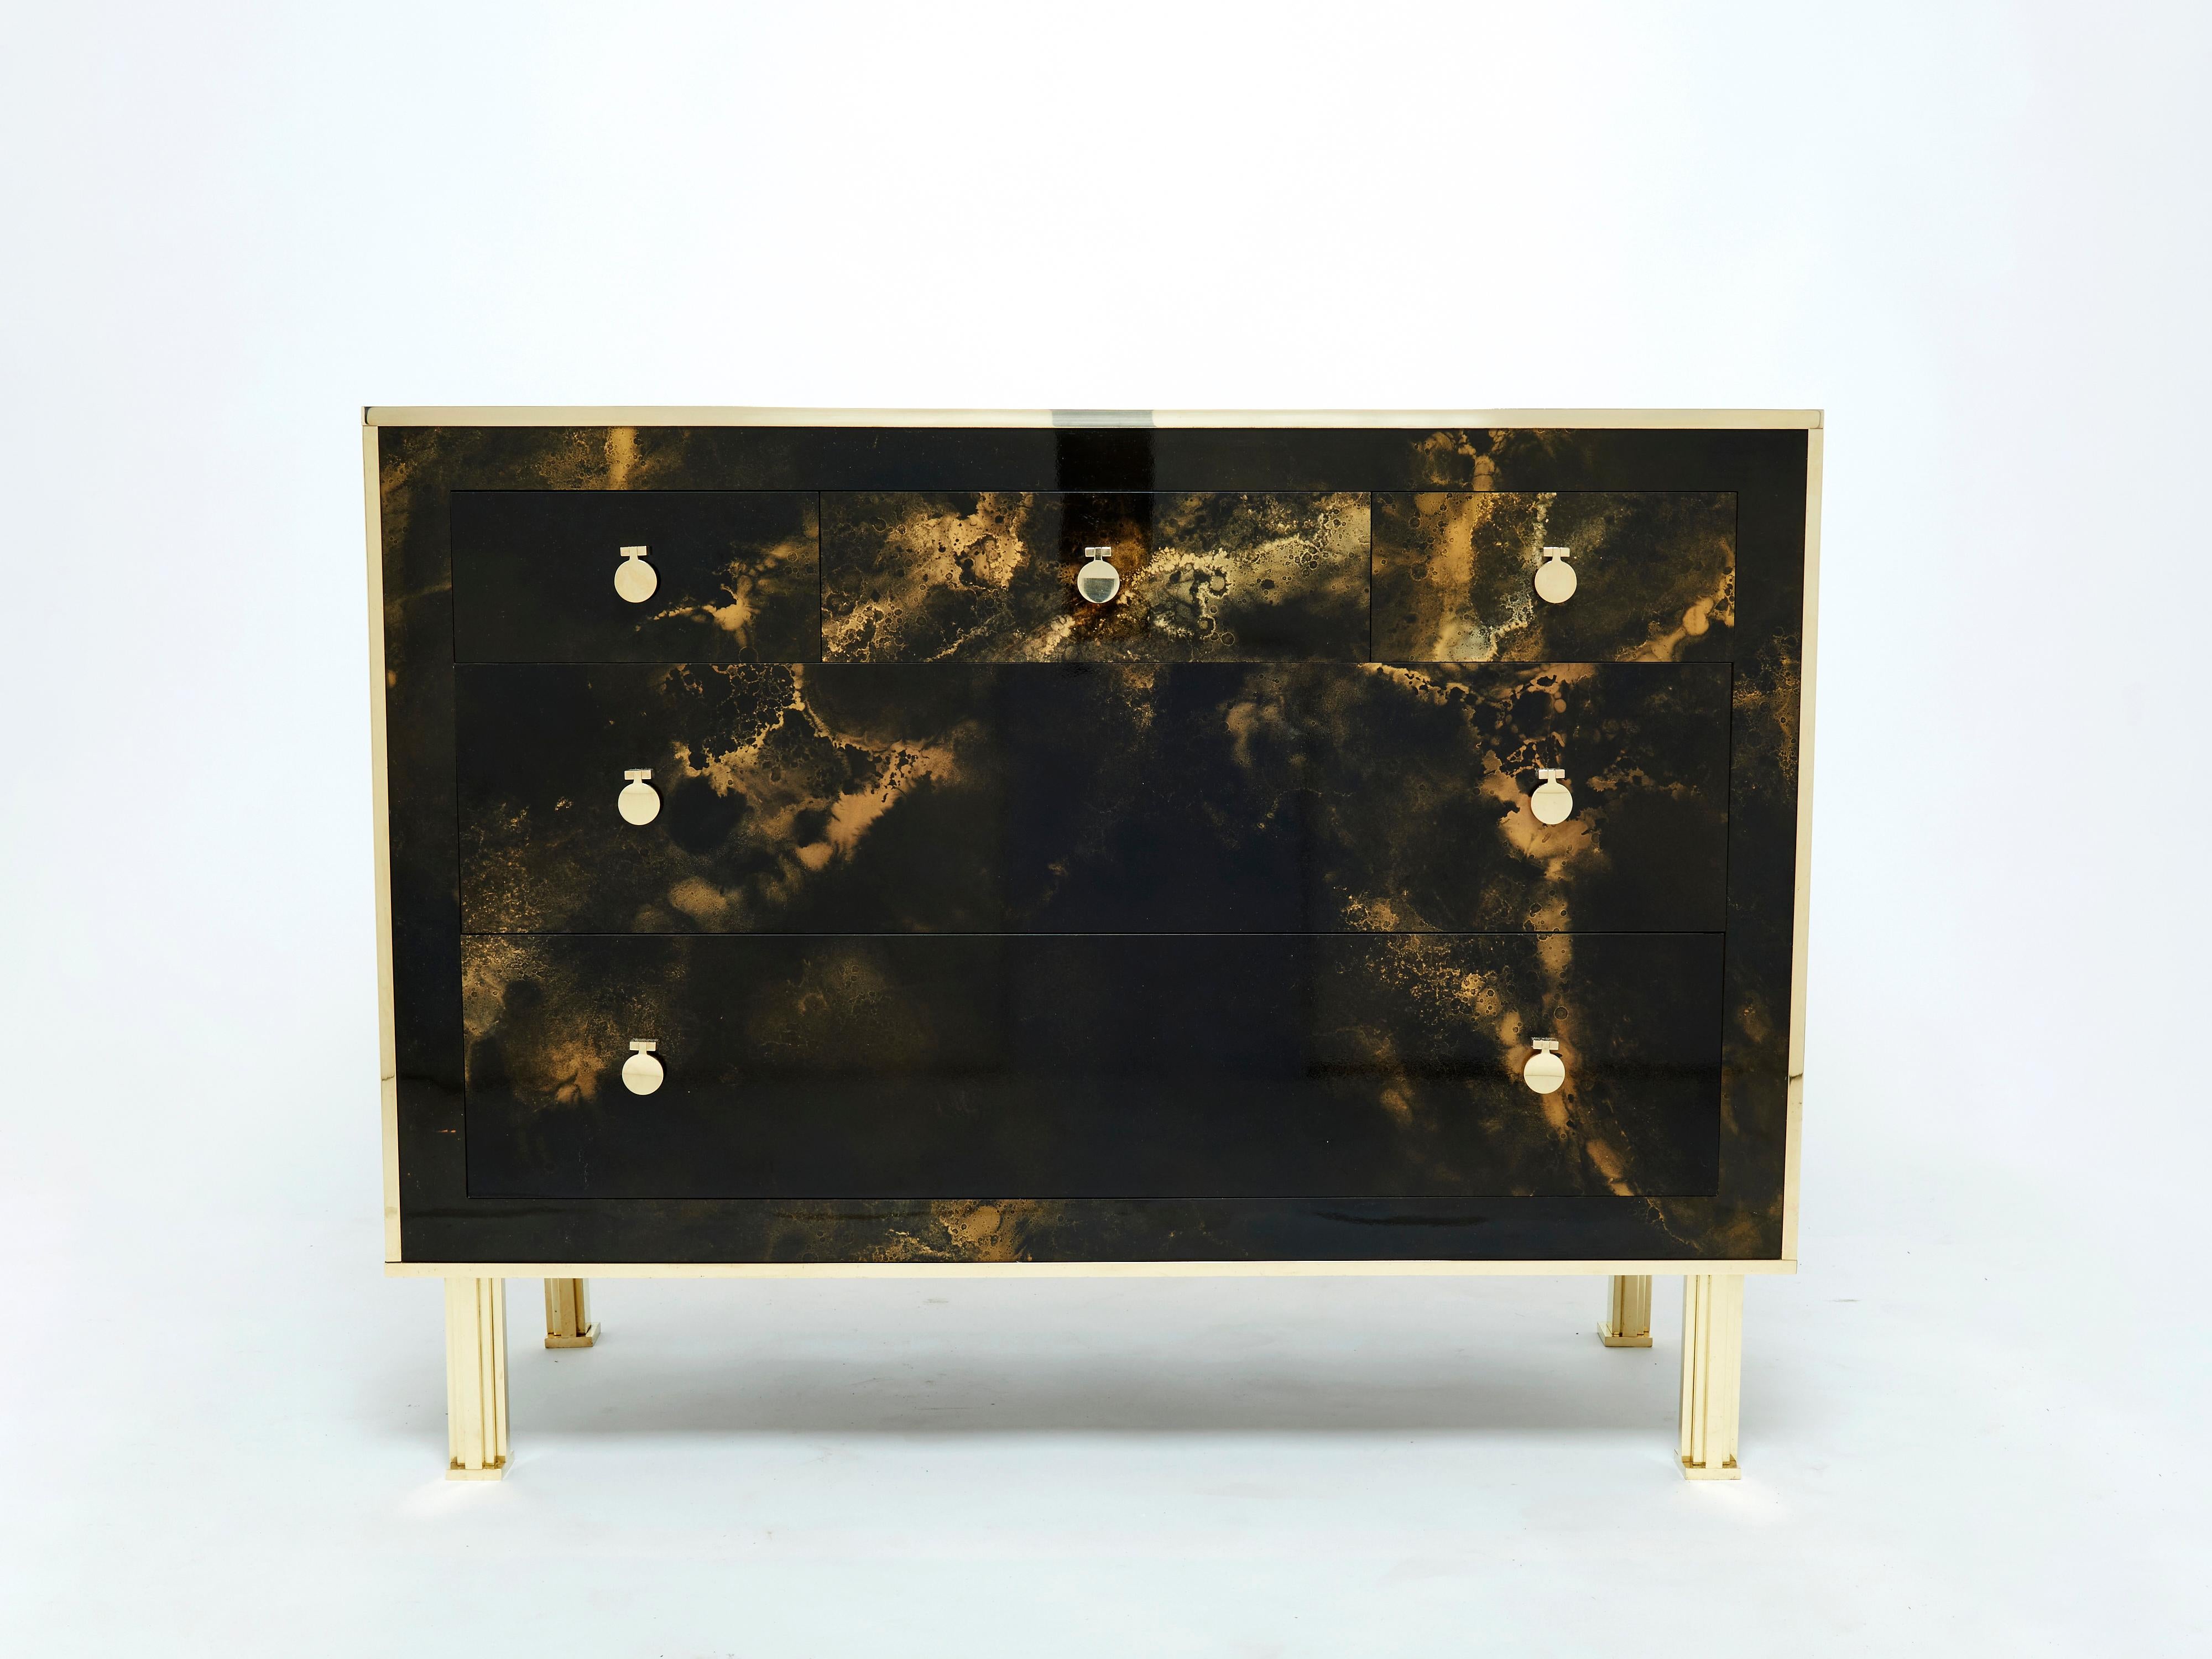 An exciting example of French design firm Maison Jansen’s commissioned pieces. This chest of drawers is made from solid mahogany, lacquered in a rich dark brown and bronze–golden finish. The resulting effect is a beautiful mottling of color around